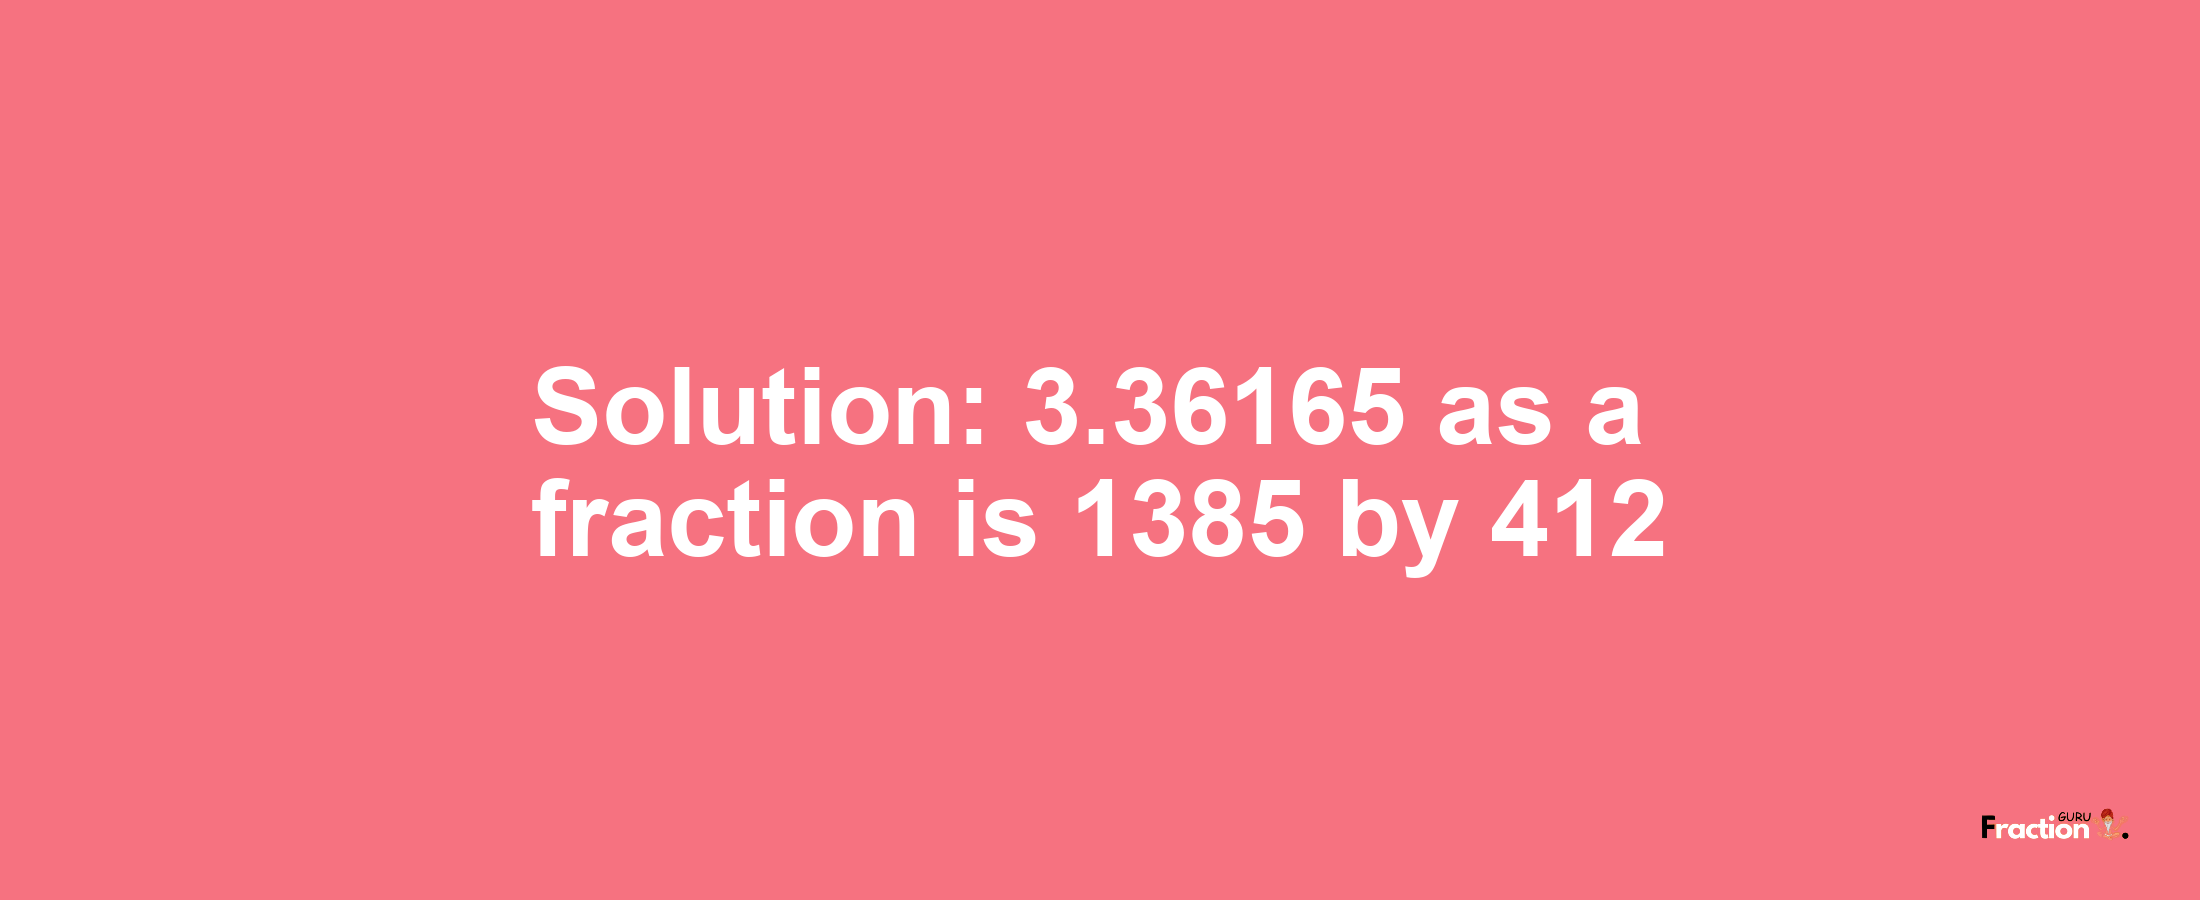 Solution:3.36165 as a fraction is 1385/412